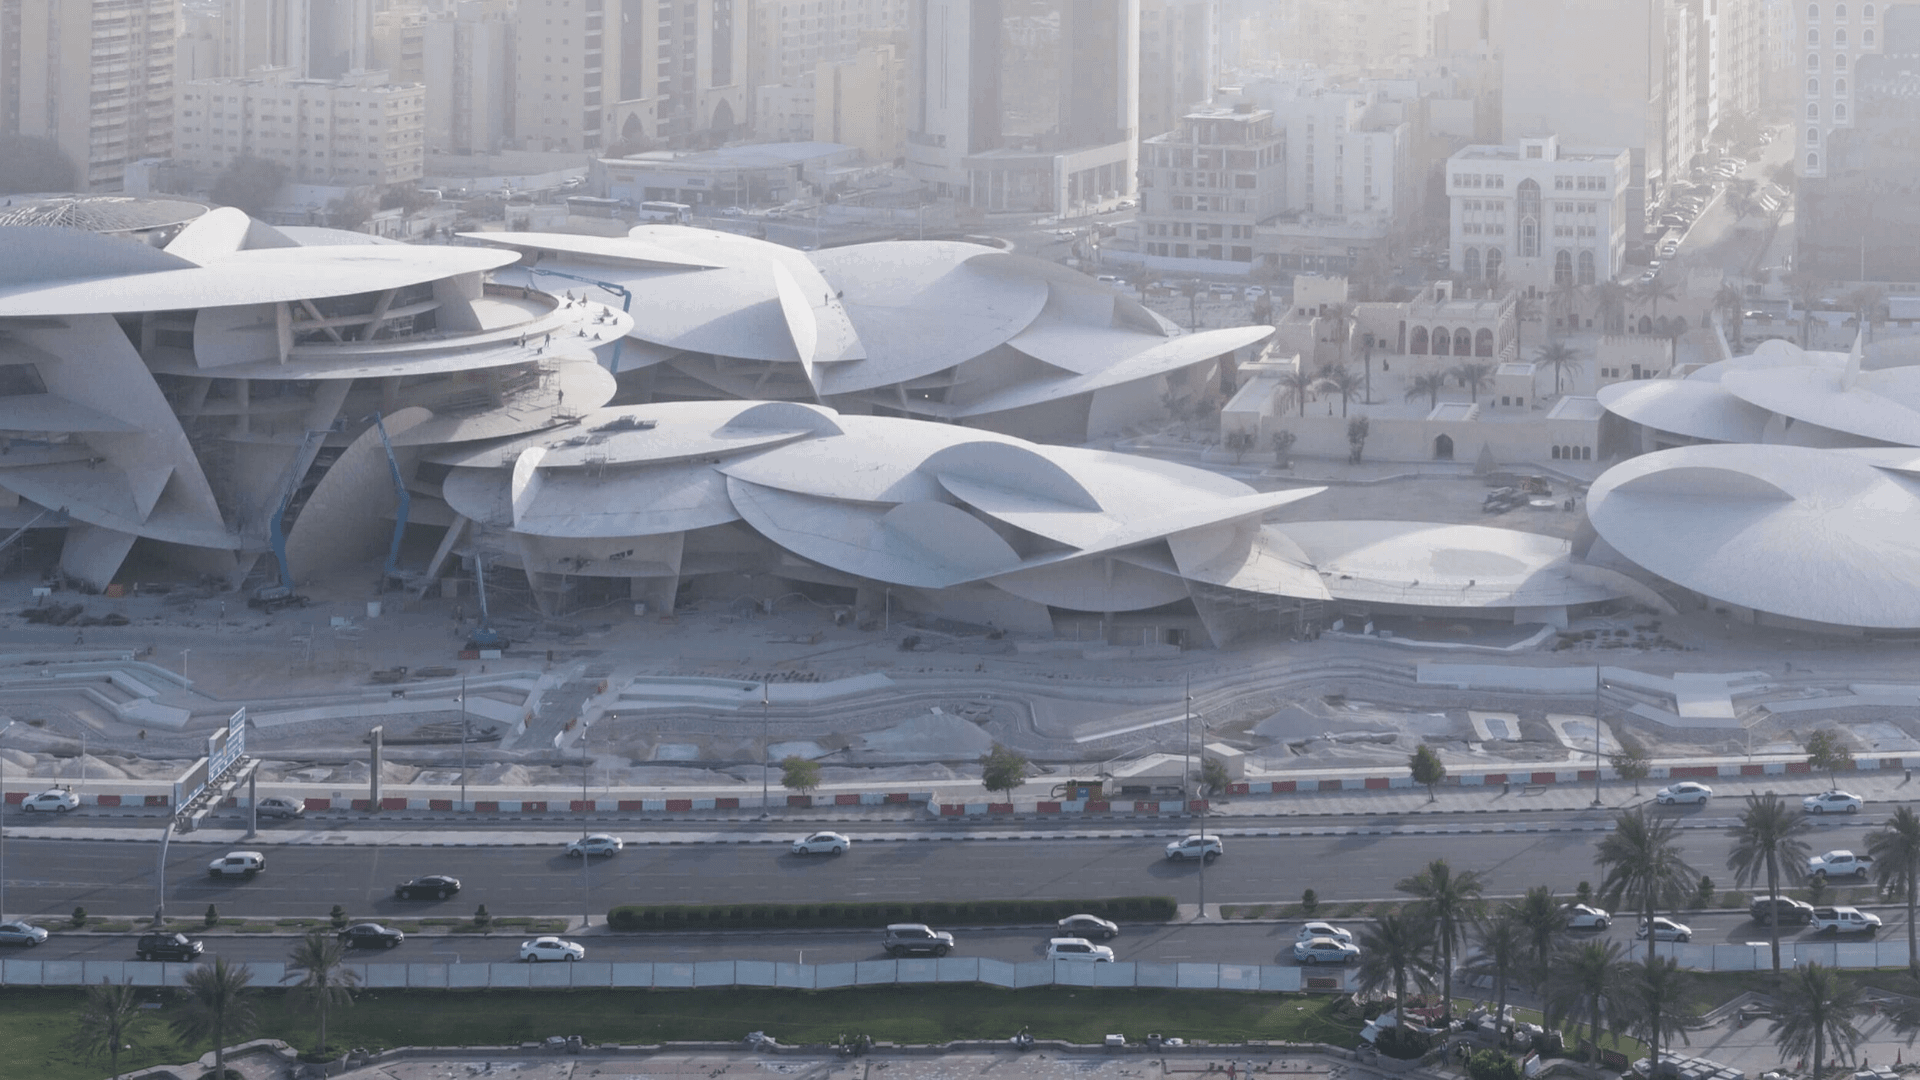 The Qatar National Museum, Doha Nuaire Case Study